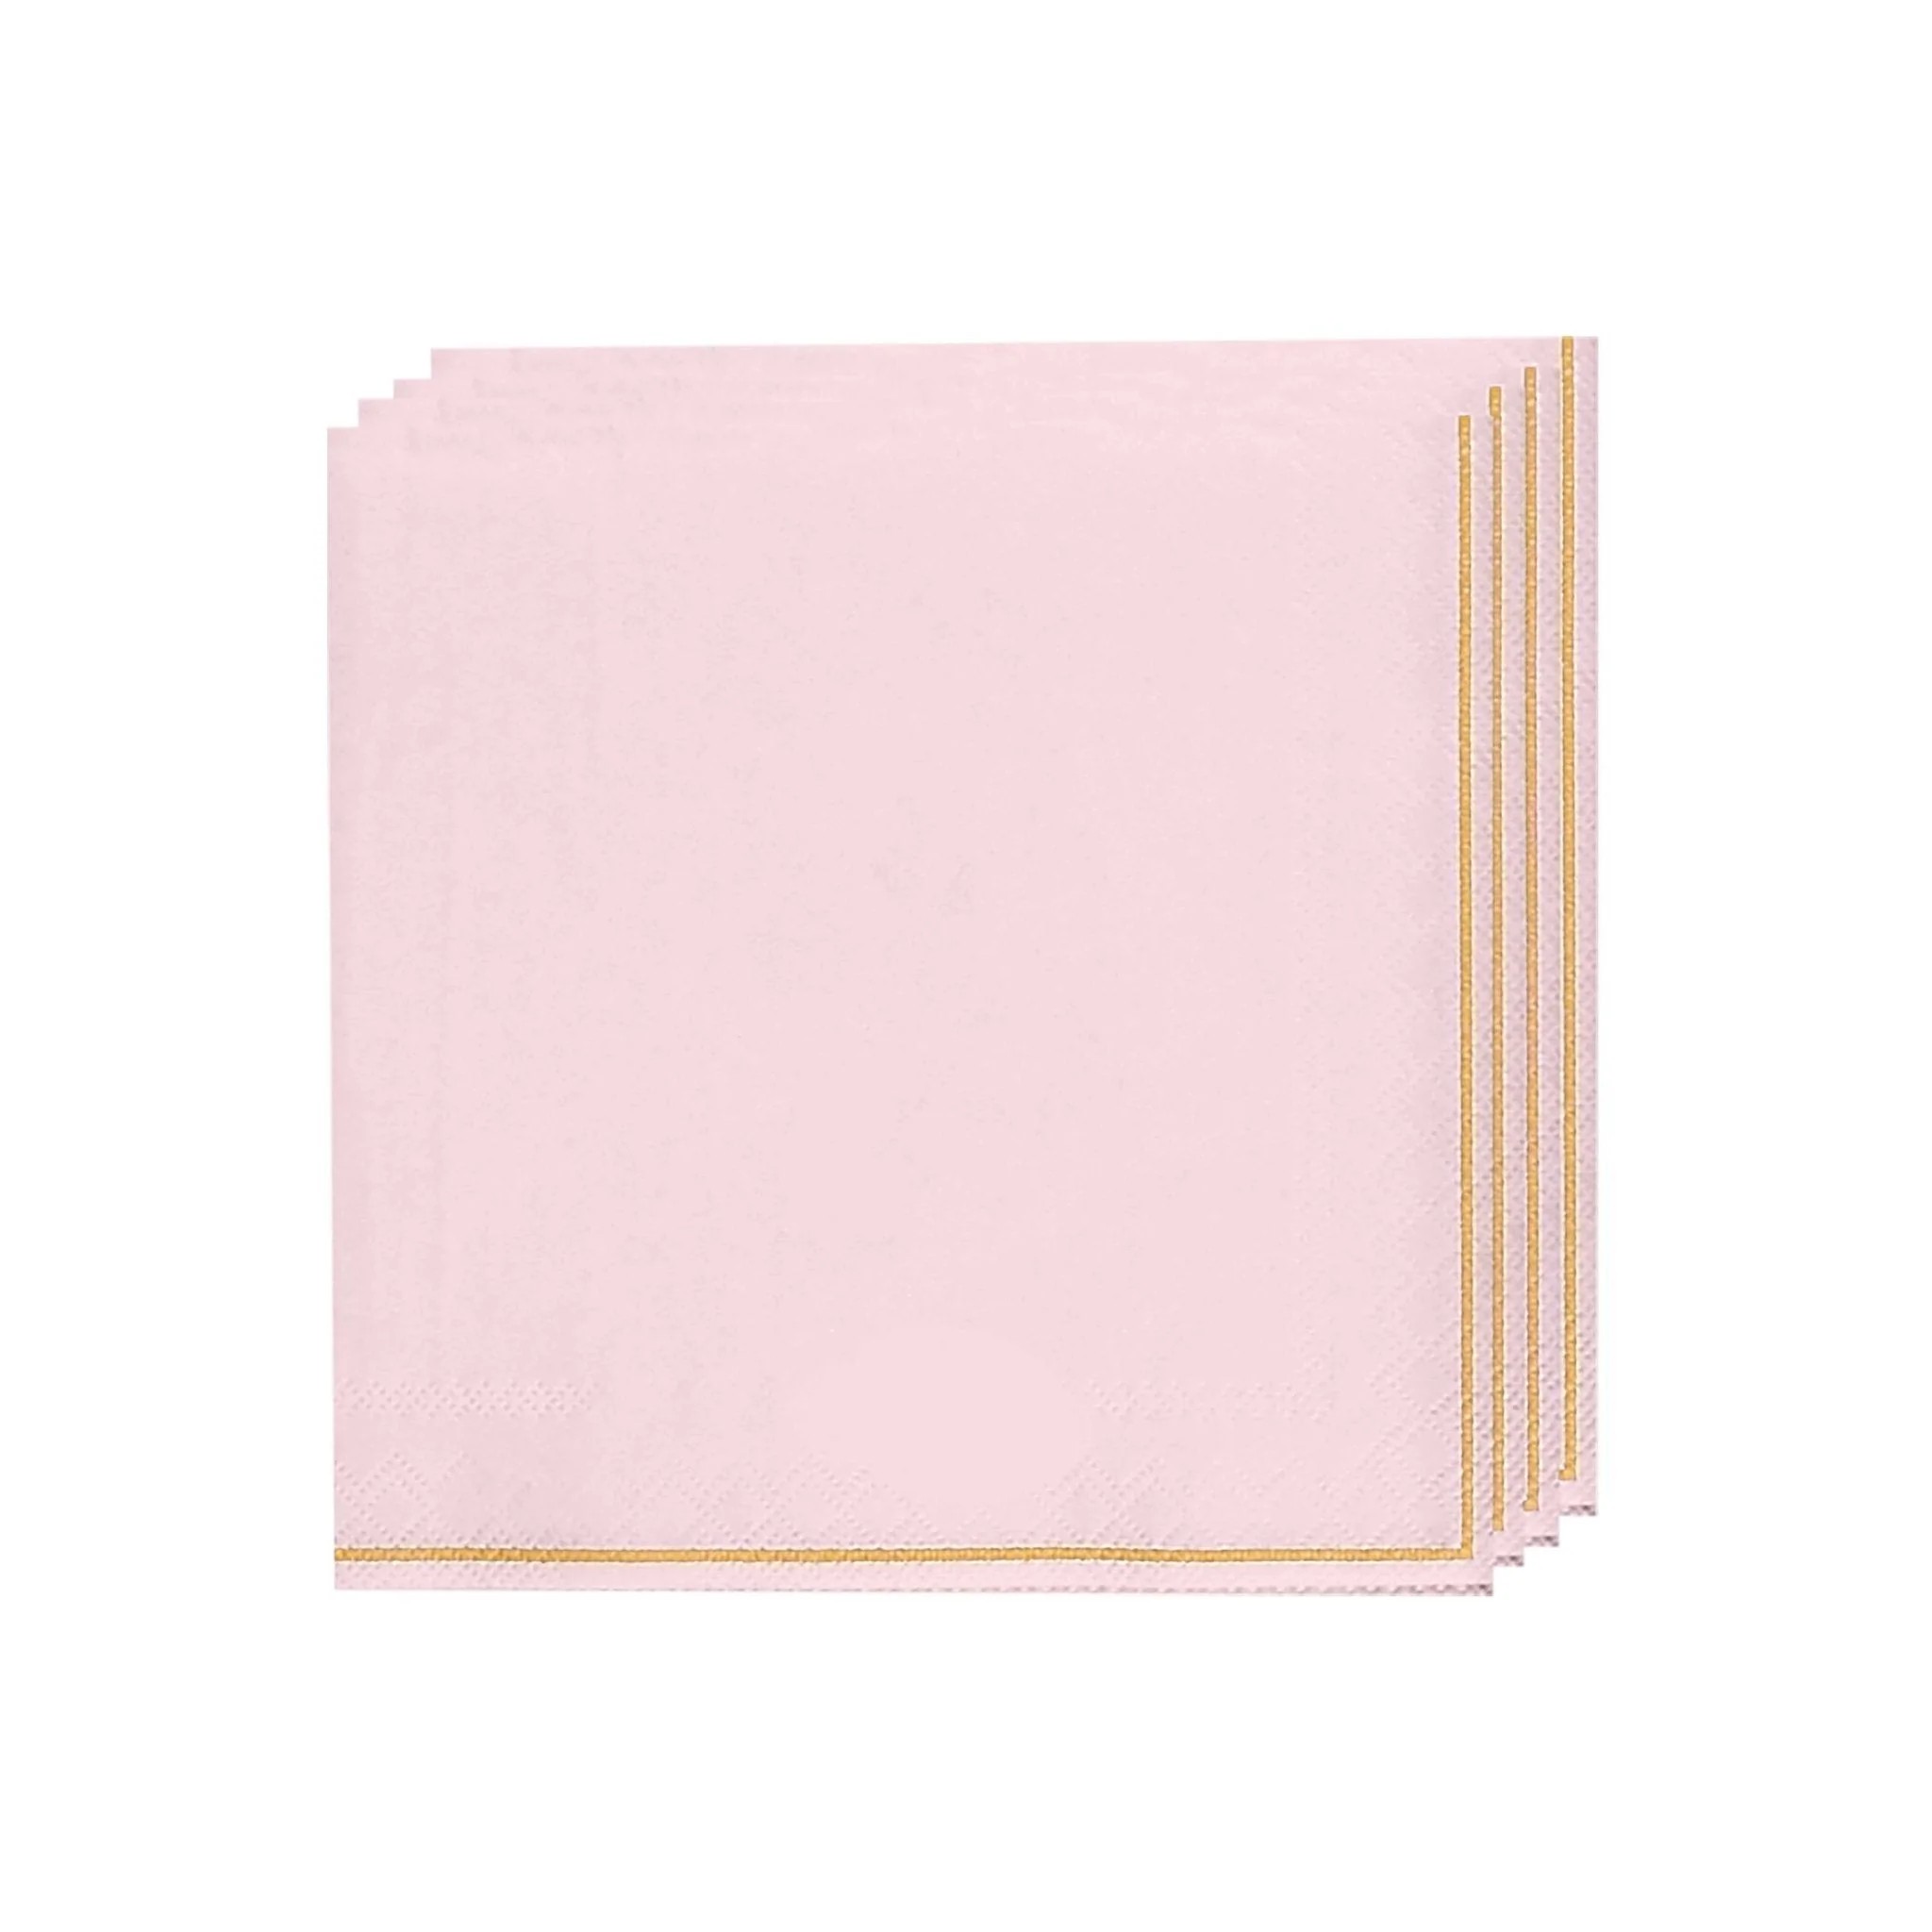 Luxe Party Blush with Gold Stripe Beverage Napkins - 20 pcs